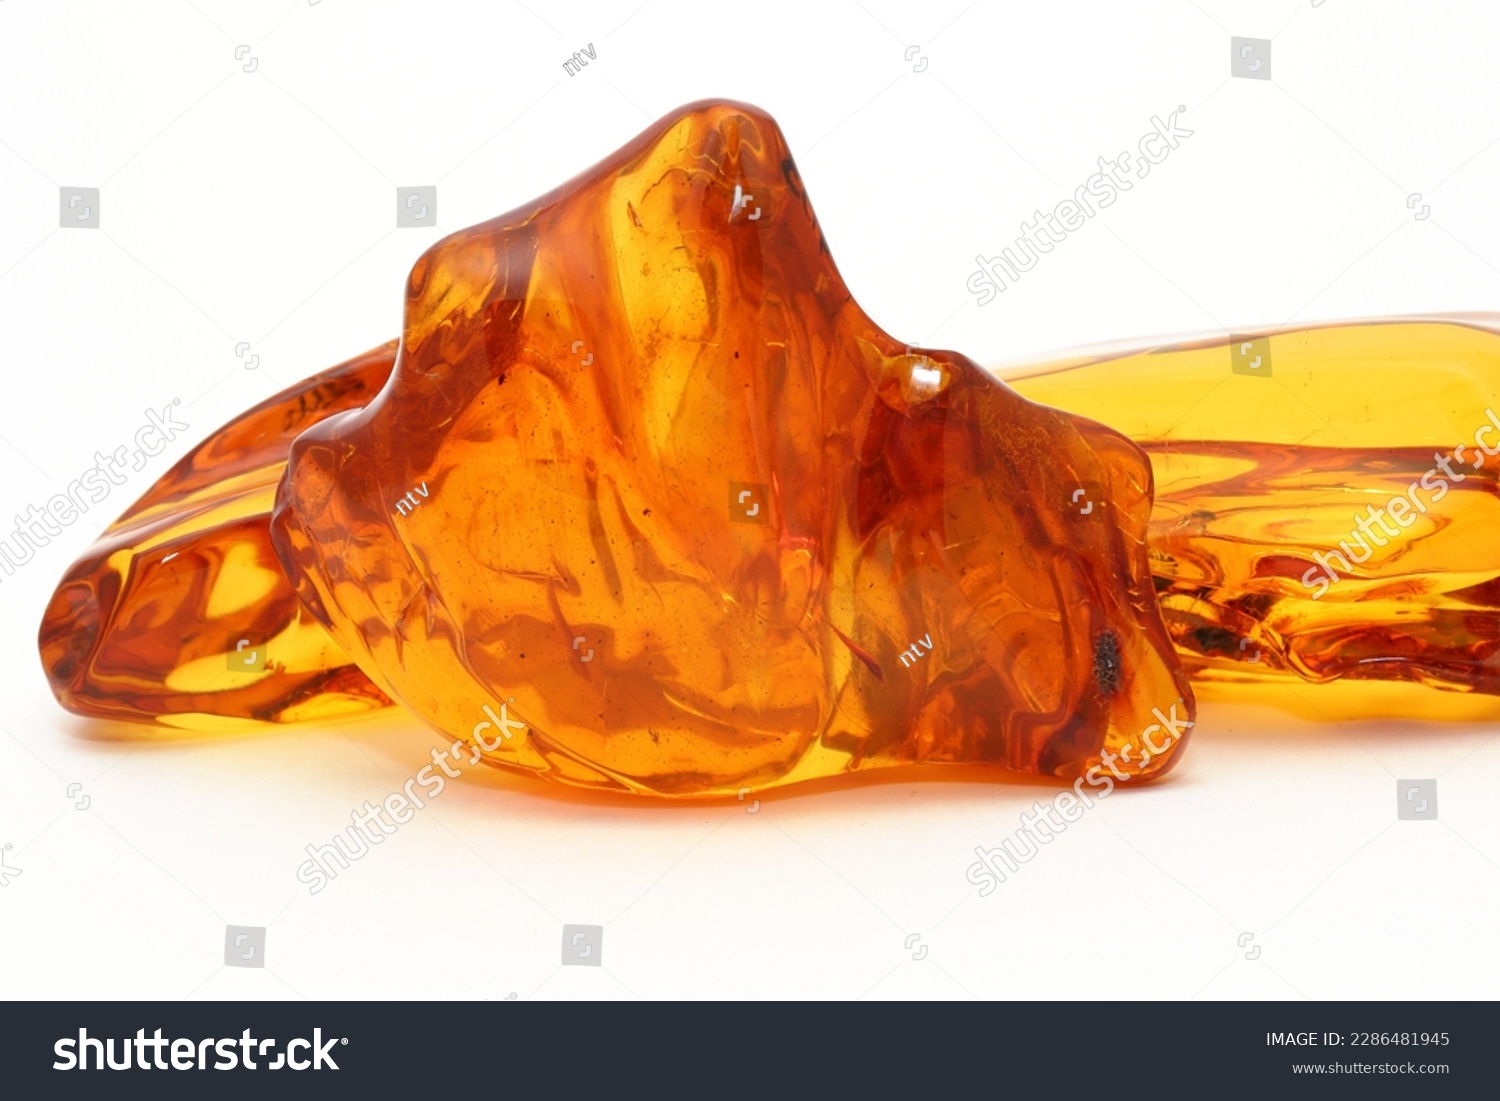  Transparent polished amber on a white background. Copal. Ancient fossil resin. Precious mineral. Patterns in amber. Natural material for jewelers. Science and geology. #2286481945